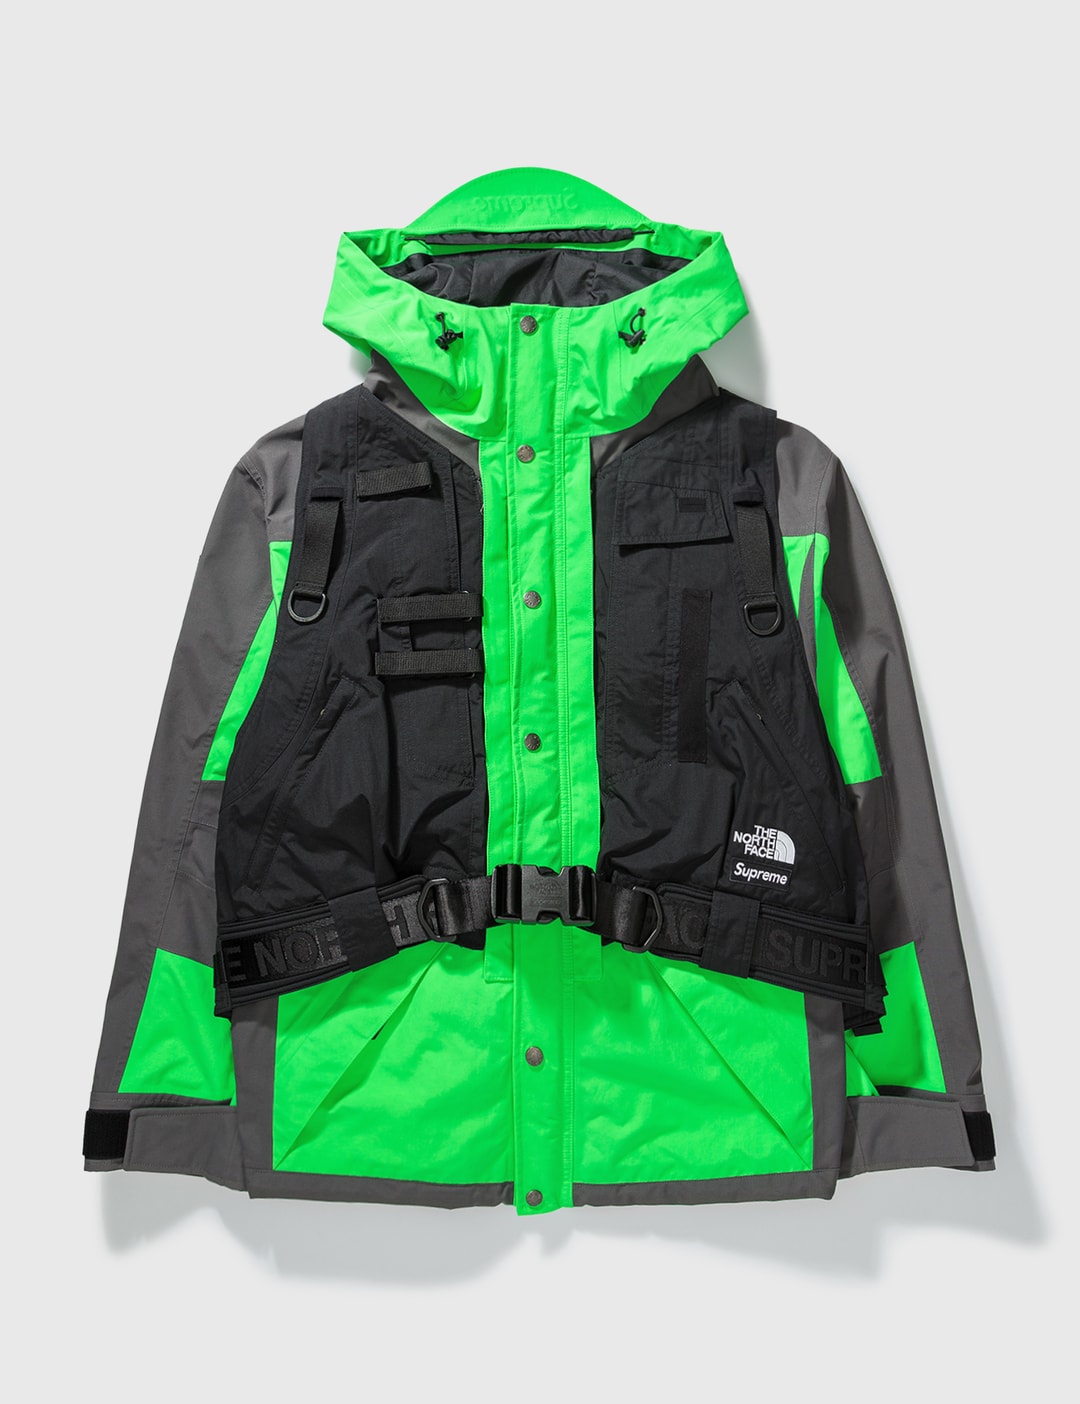 Bezwaar Industrialiseren efficiënt Supreme - Supreme X The North Face Goretex Jacket Utility Vest | HBX -  Globally Curated Fashion and Lifestyle by Hypebeast